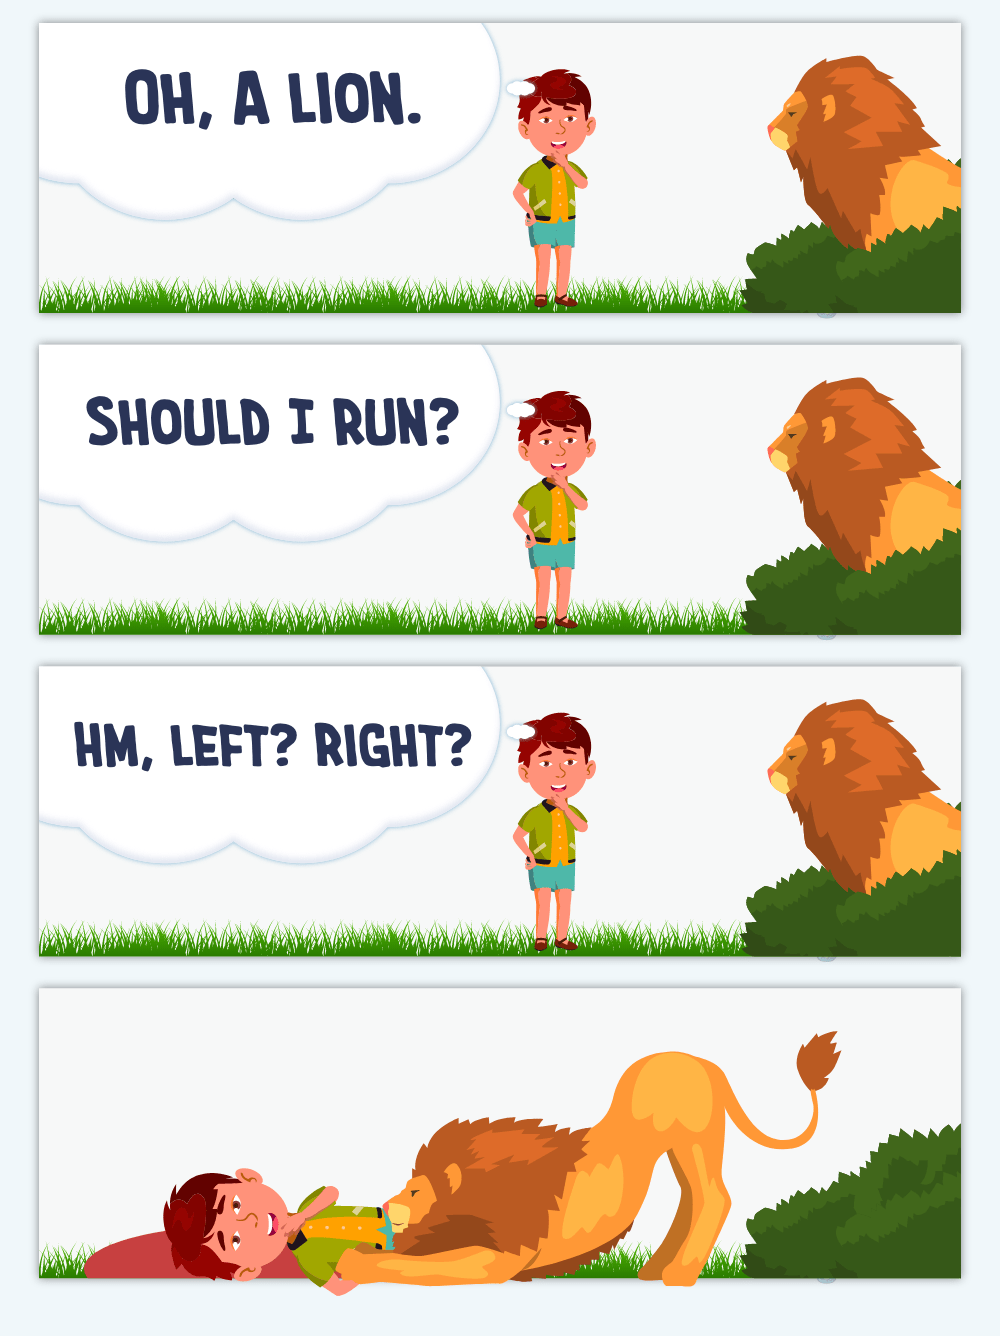 Cartoon of boy debating whether to run away from a lion. He takes too long and gets eaten